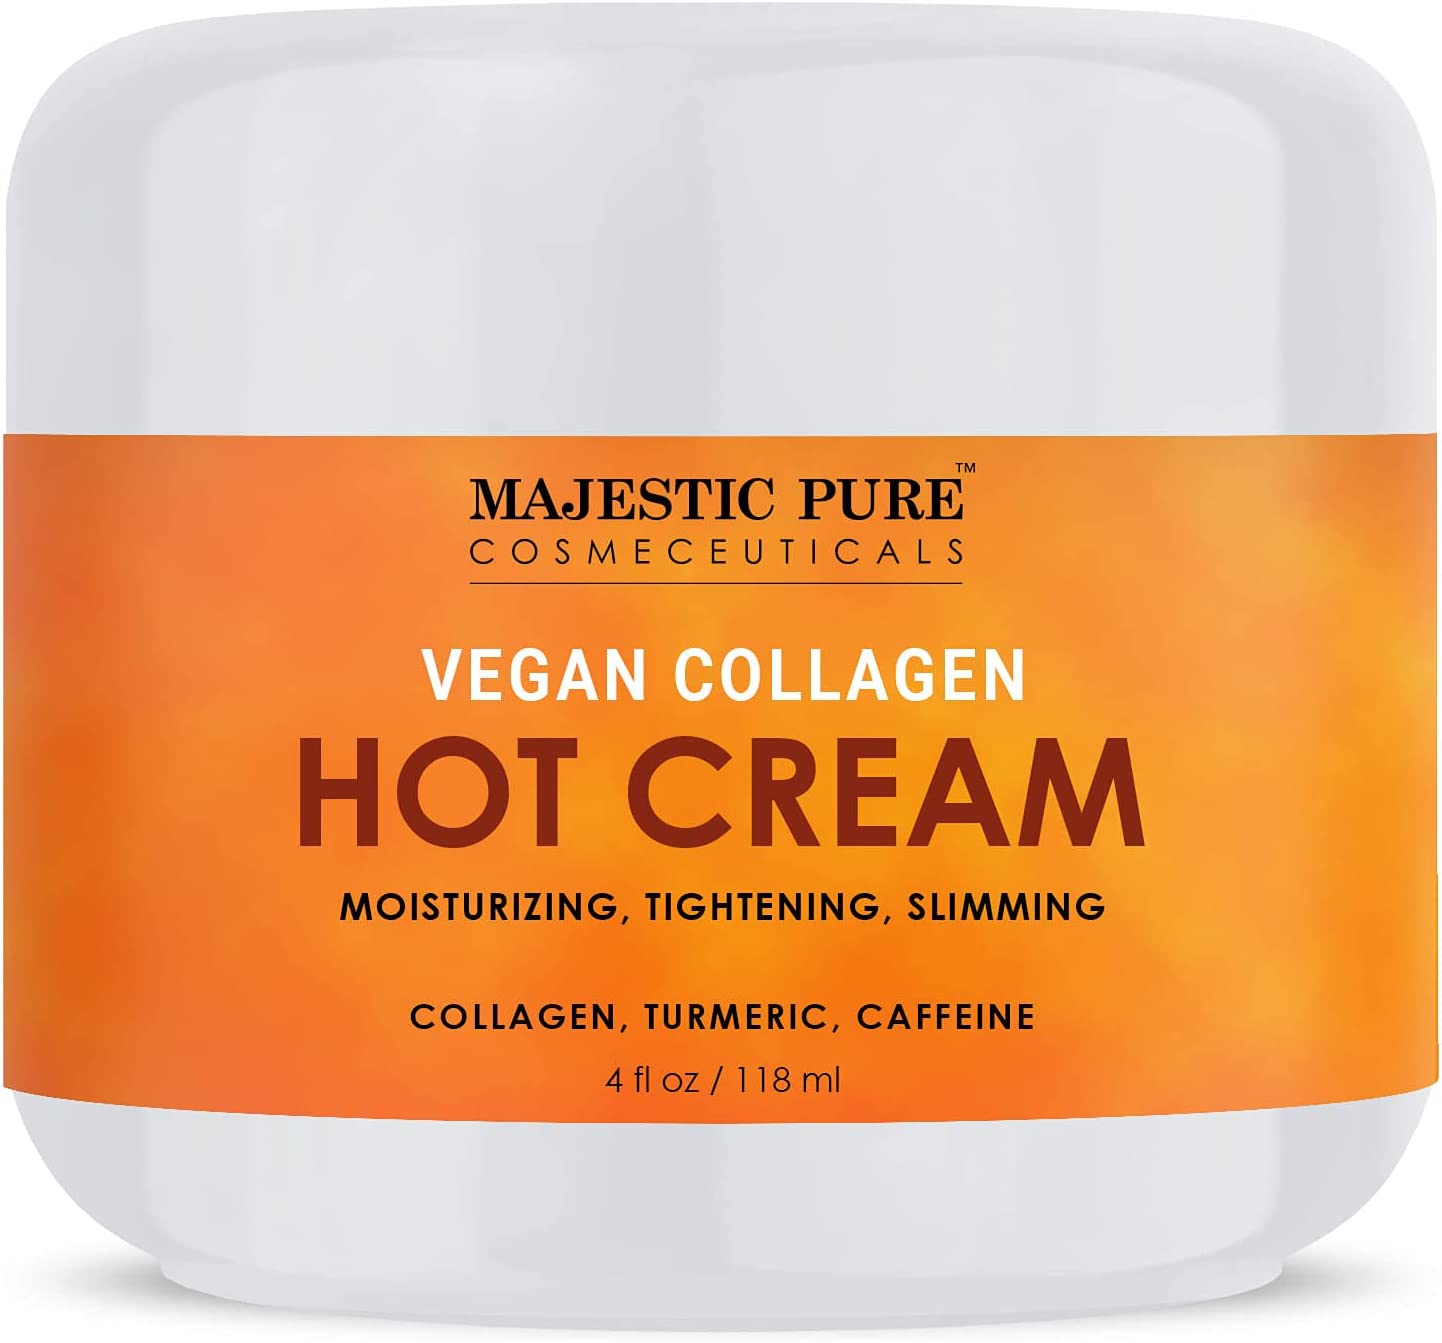 Review of MAJESTIC PURE Hot Cream - with Caffeine, Vegan Collagen & Turmeric